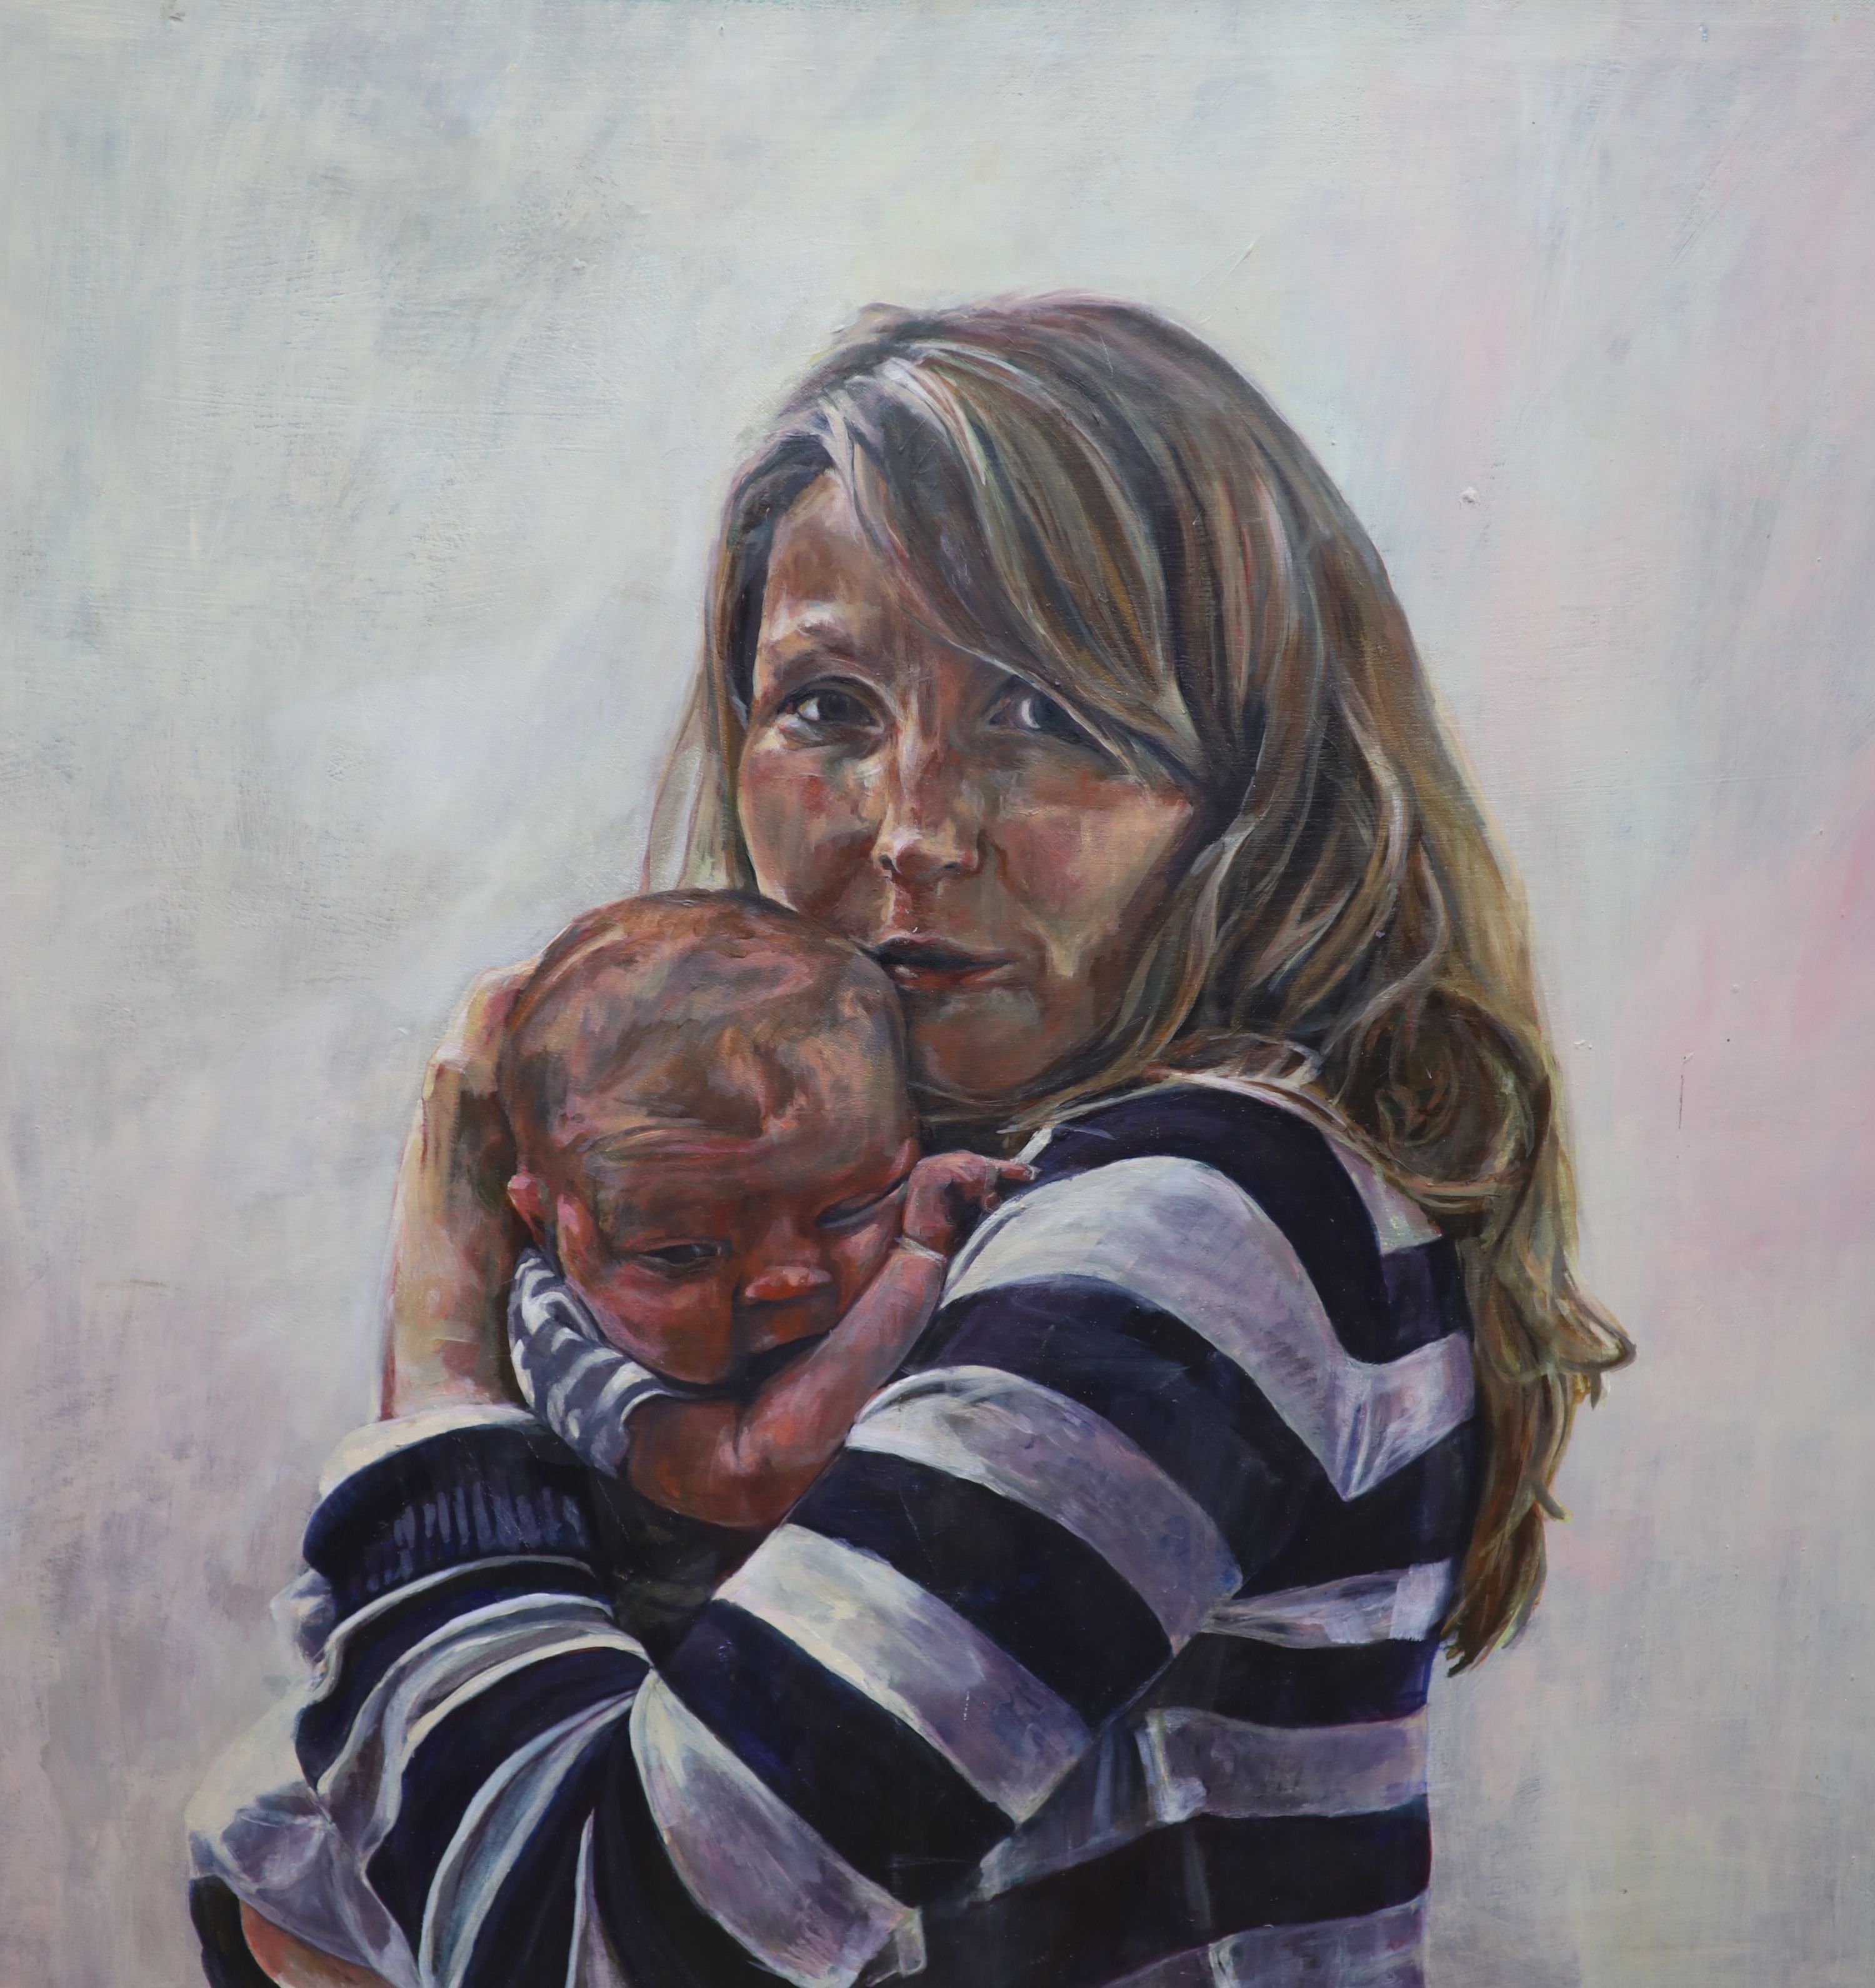 Linda de Canha Payne, Portrait of a woman and child, Mall Galleries label verso, Hesketh Hubbard exhibition, signed and dated 2012 verso, 102 x 102cm